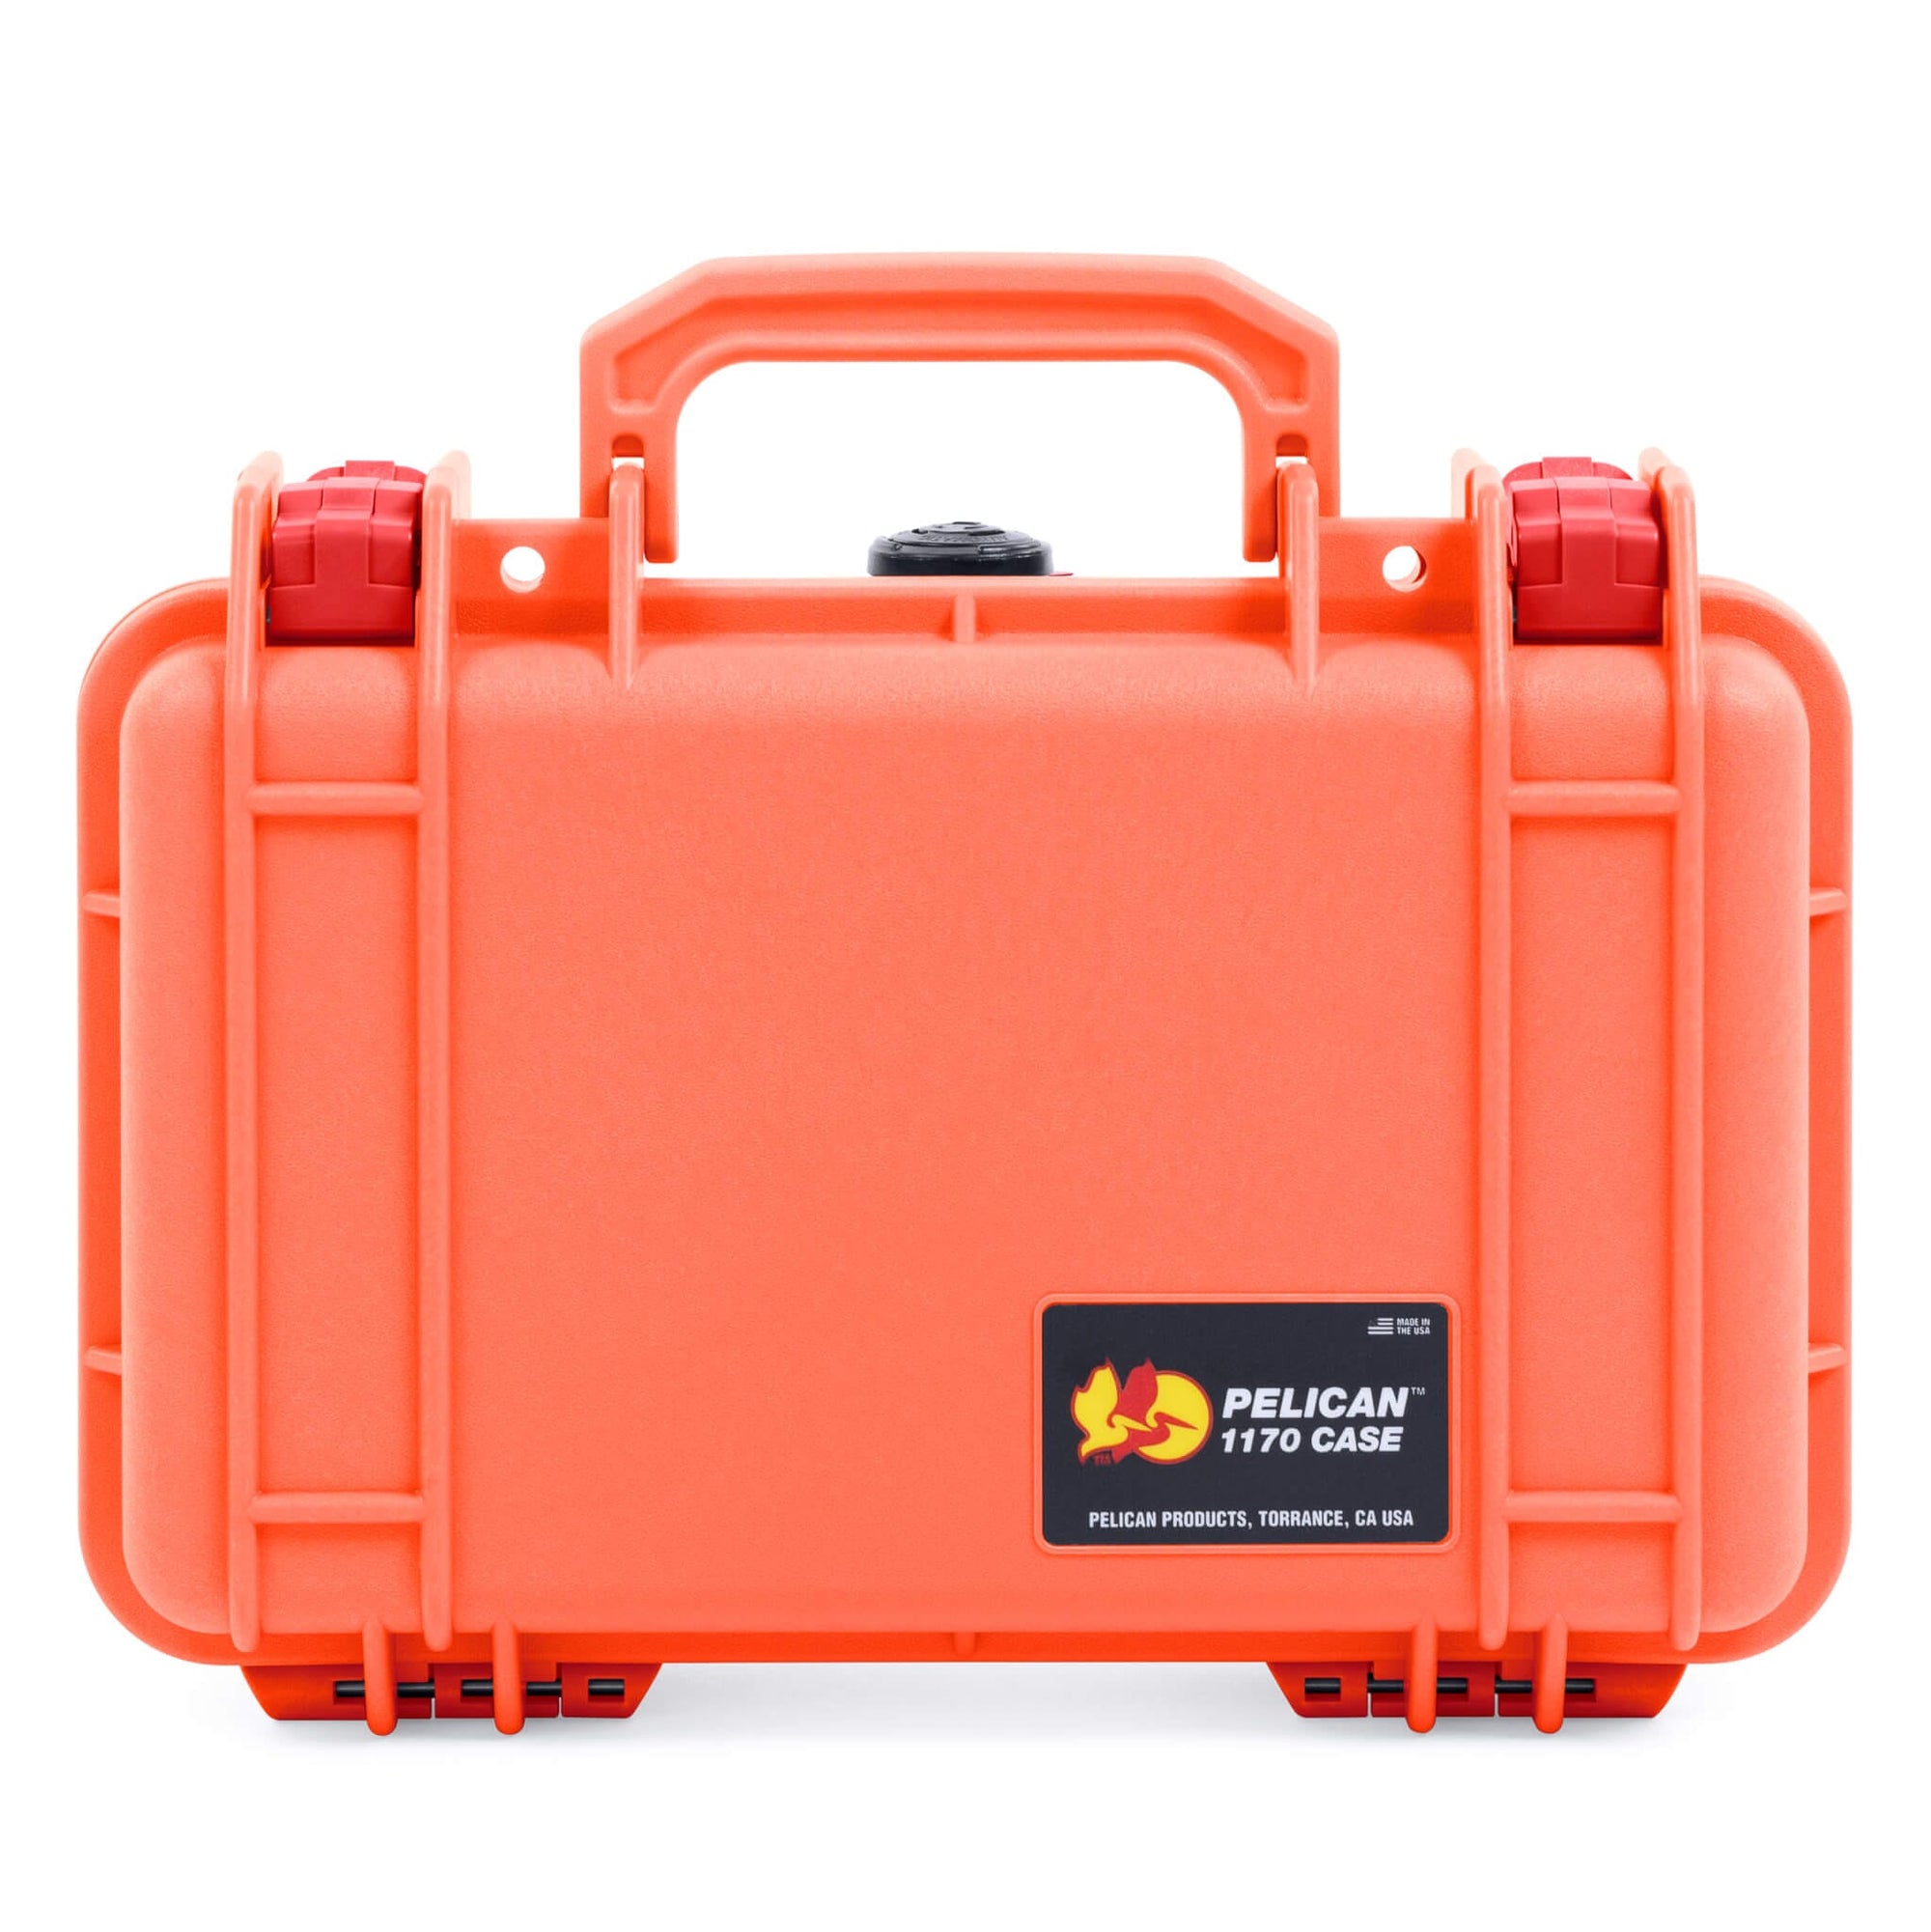 Pelican 1170 Case, Orange with Red Latches ColorCase 